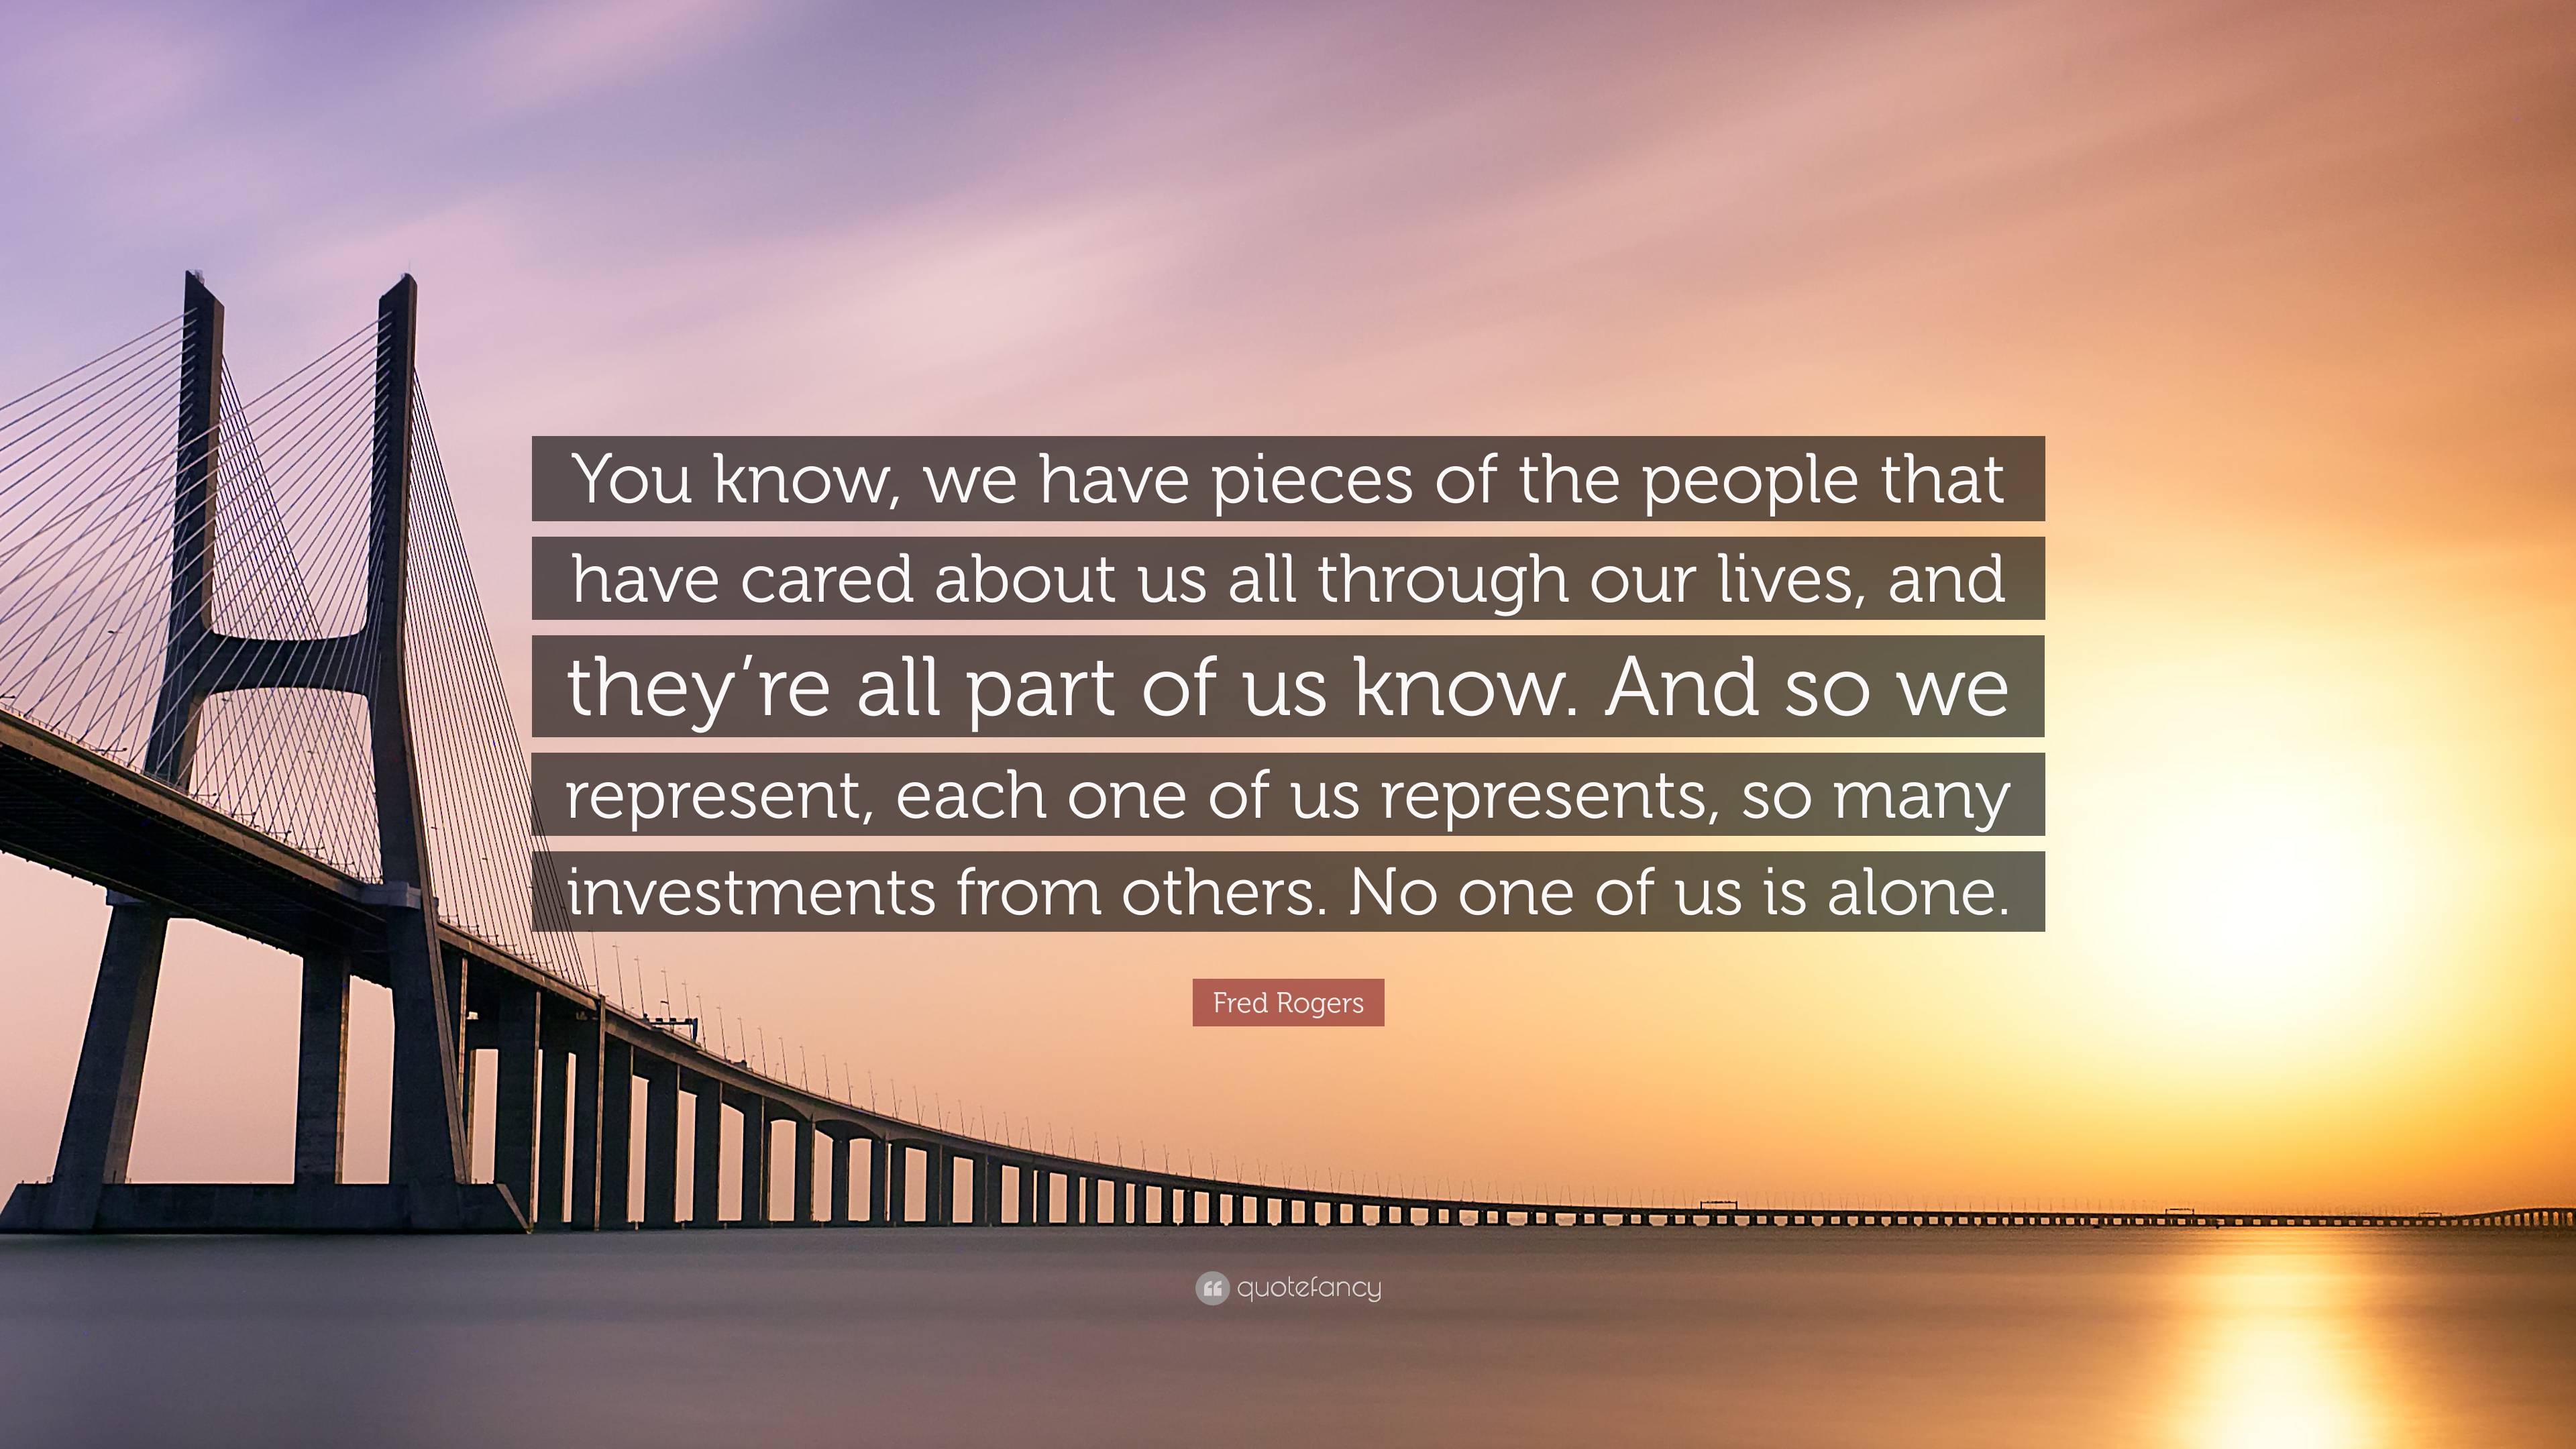 Fred Rogers Quote: “You know, we have pieces of the people that have cared  about us all through our lives, and they're all part of us know. ”